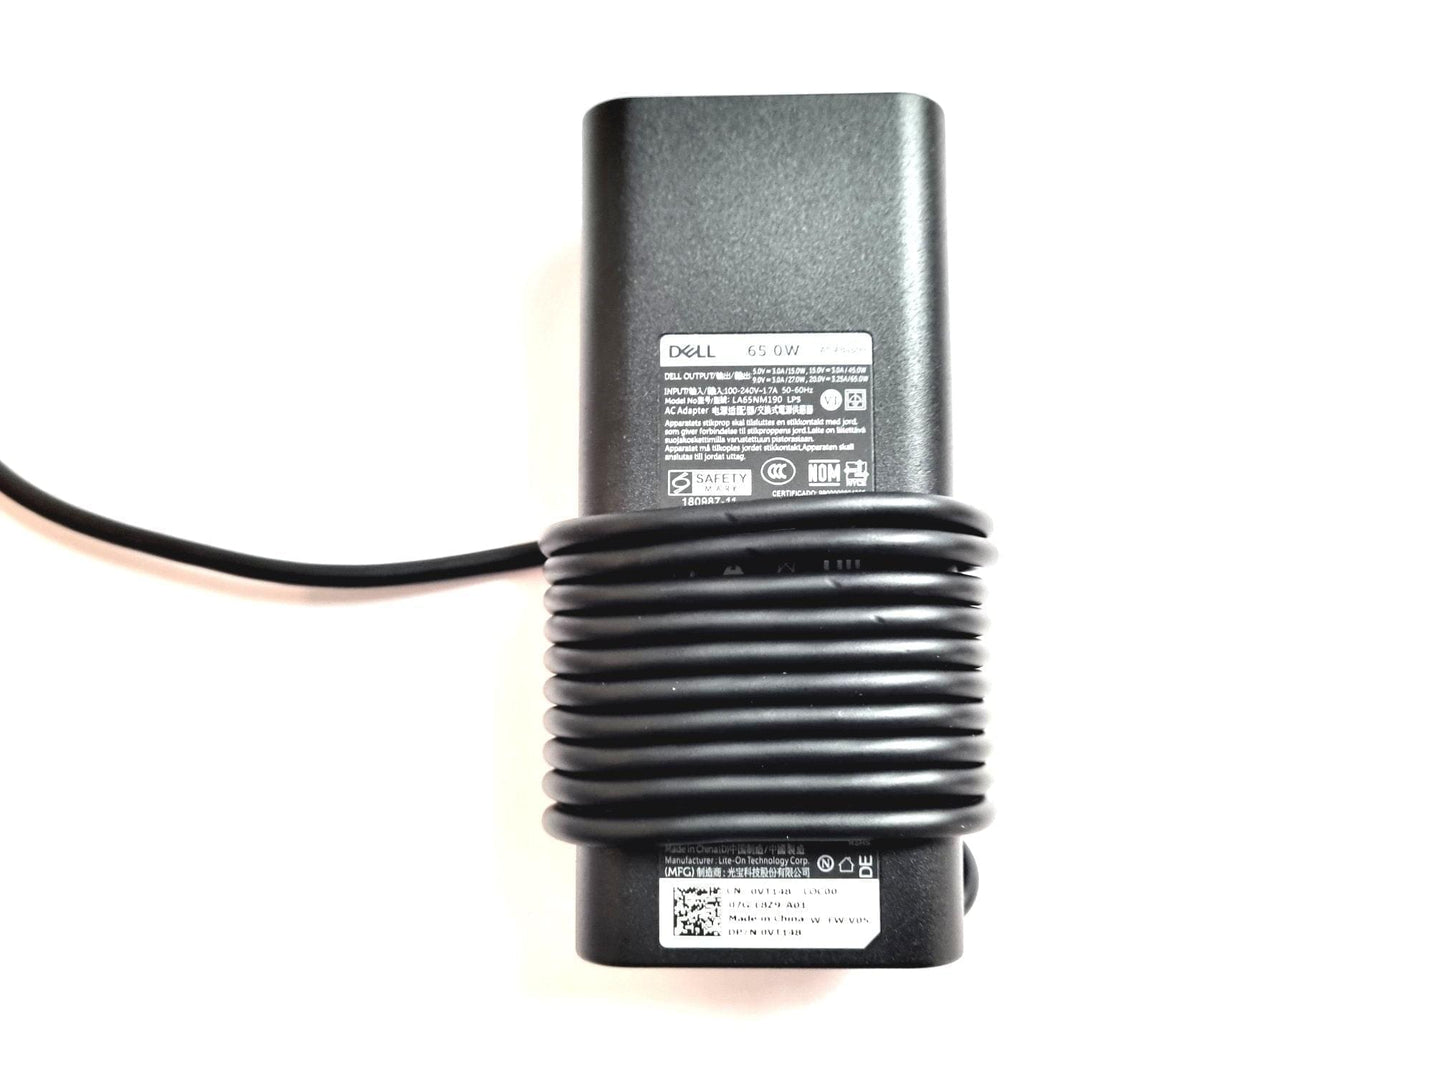 Dell 65.0W laptop charger for Latitude, XPS, Chromebook USB-C VT148 WMDHR CJG9W Dell